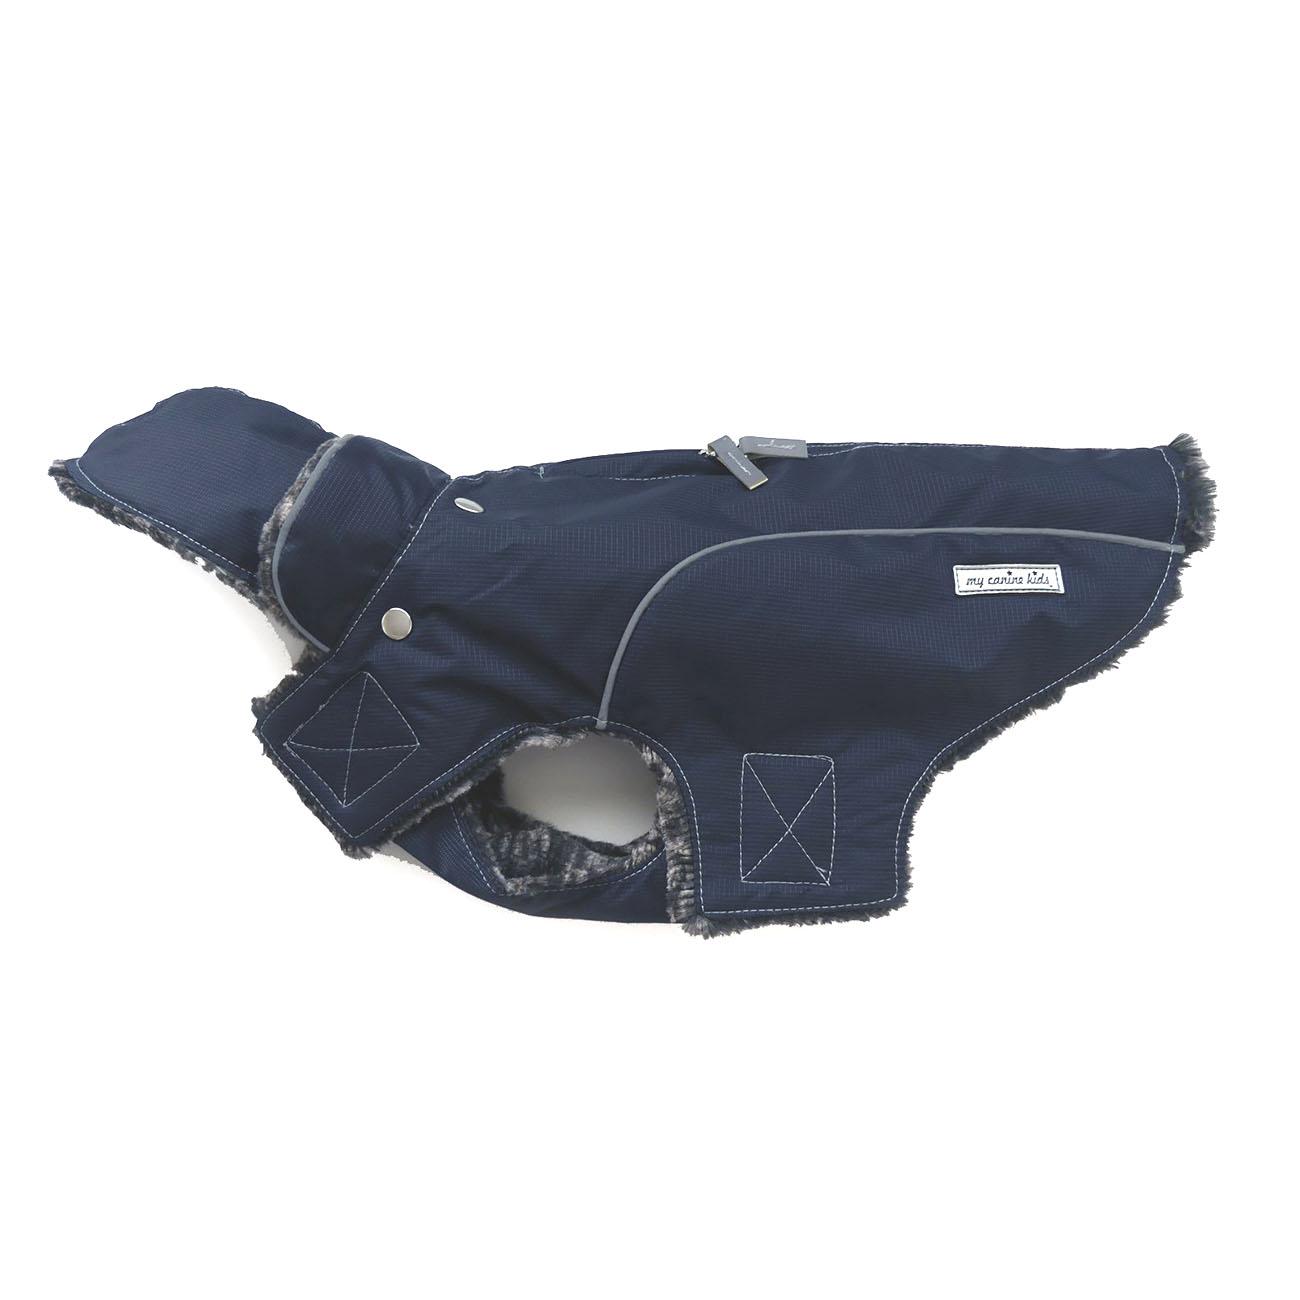 My Canine Kids Precision Fit Extreme Element Dog Parka - Navy